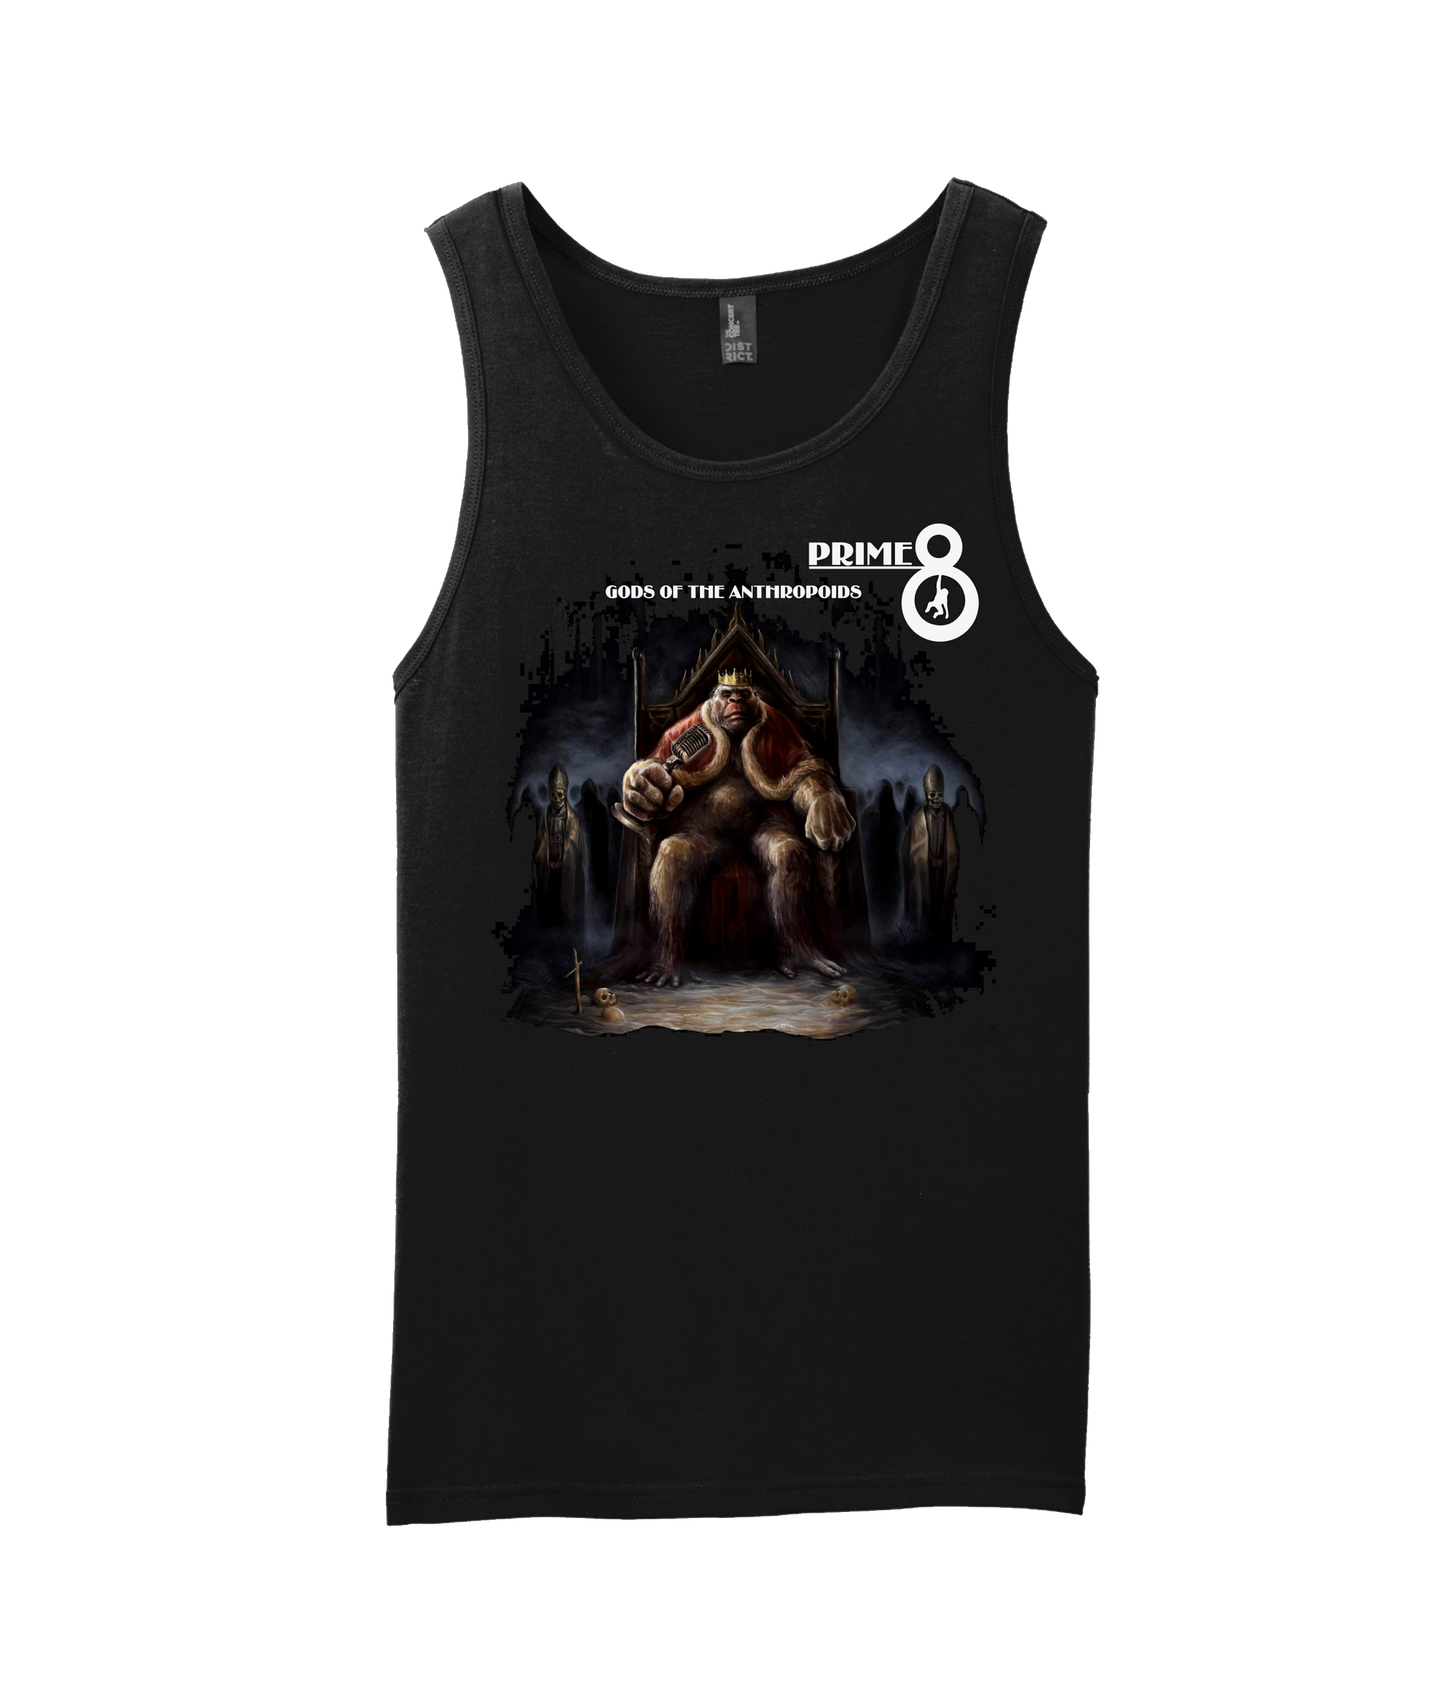 Prime 8 - Gods of the Anthropoids (EP) - Black Tank Top